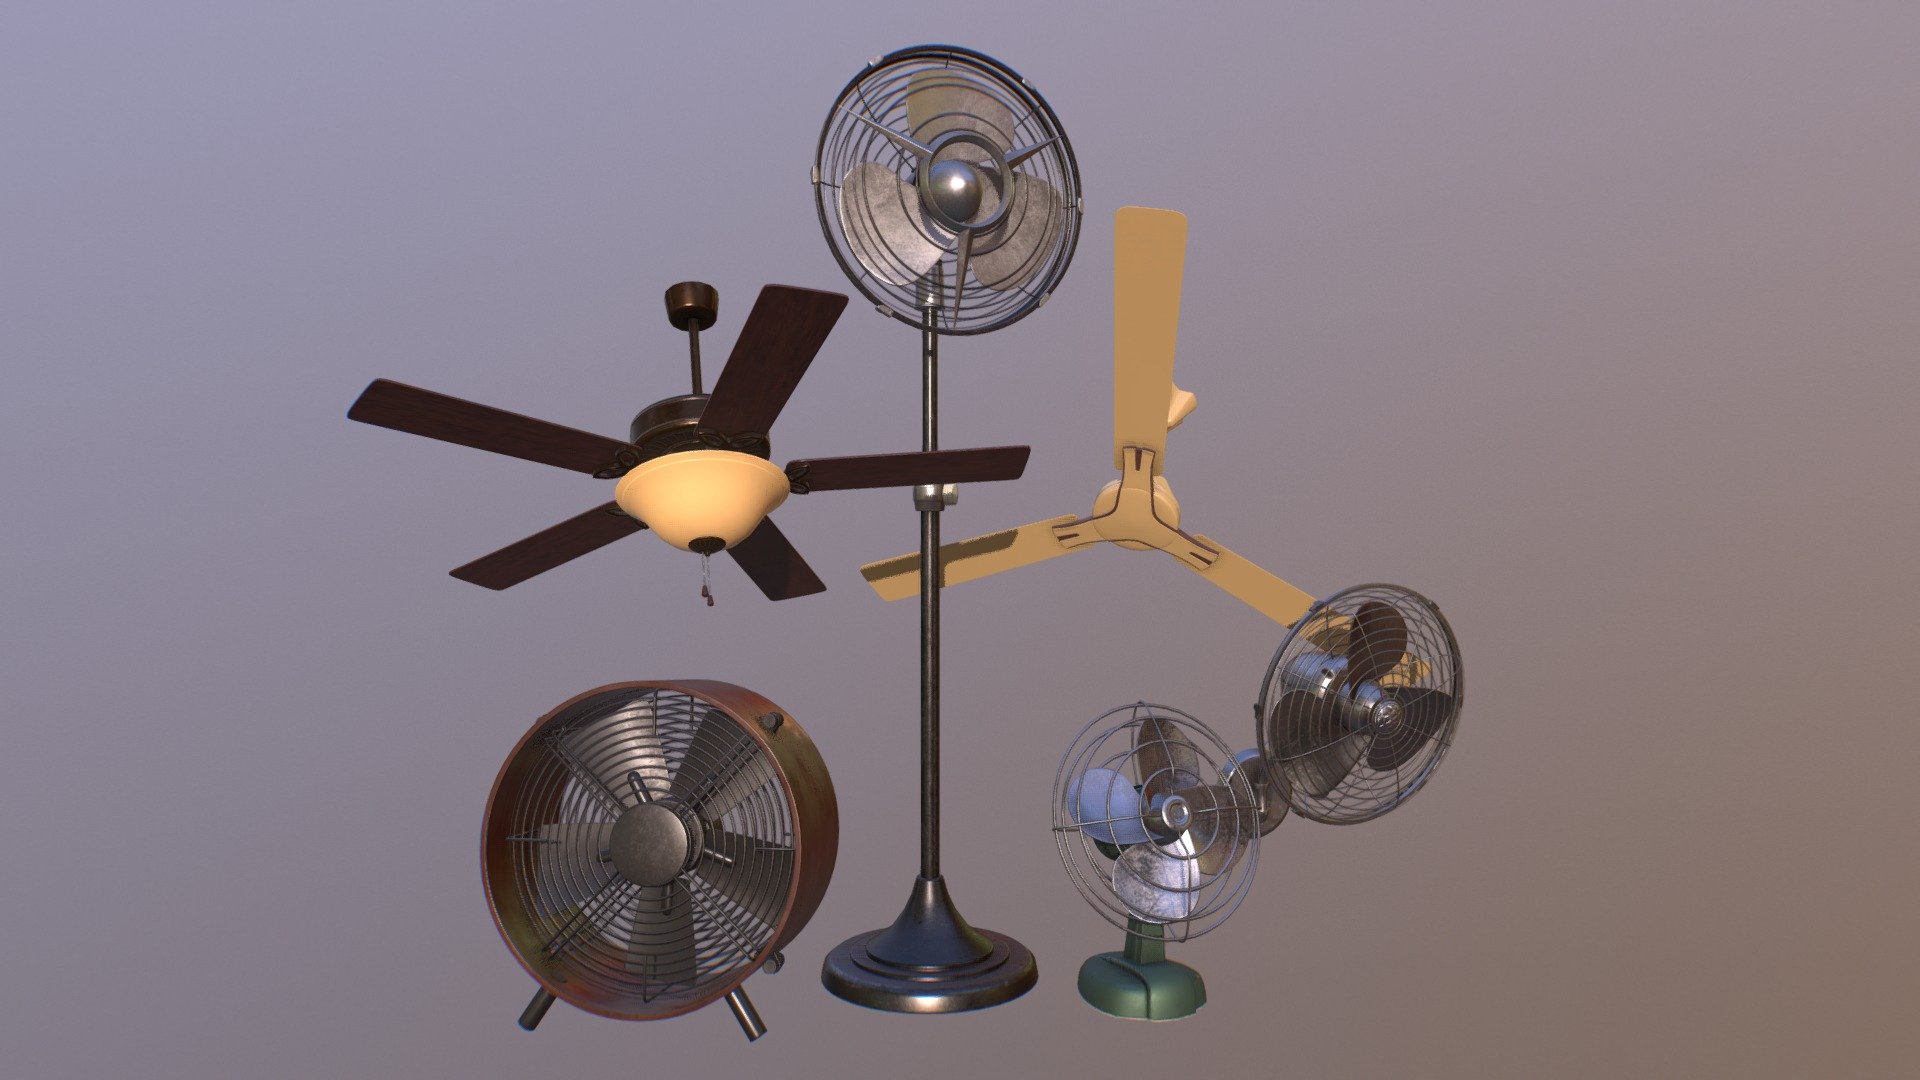 Excellent set of fans, cool your game;)




Ready for animation




Contains textures 2048x2048




PBR shaders 




Fan_01_Triangles 8,000 (LOD : 4500) 


Fan_02_Triangles 7,000 (LOD : 3500) 


Fan_03_Triangles 6,000 (LOD : 3000)



Fan_04_Triangles 7,000 (LOD : 3800) 


Fan_05_Triangles 2,000  (LOD : 1200) 


Fan_06_Triangles 4,000 (LOD : 2000) - Fan - 3D model by unicorling (@pir3d) 3d model